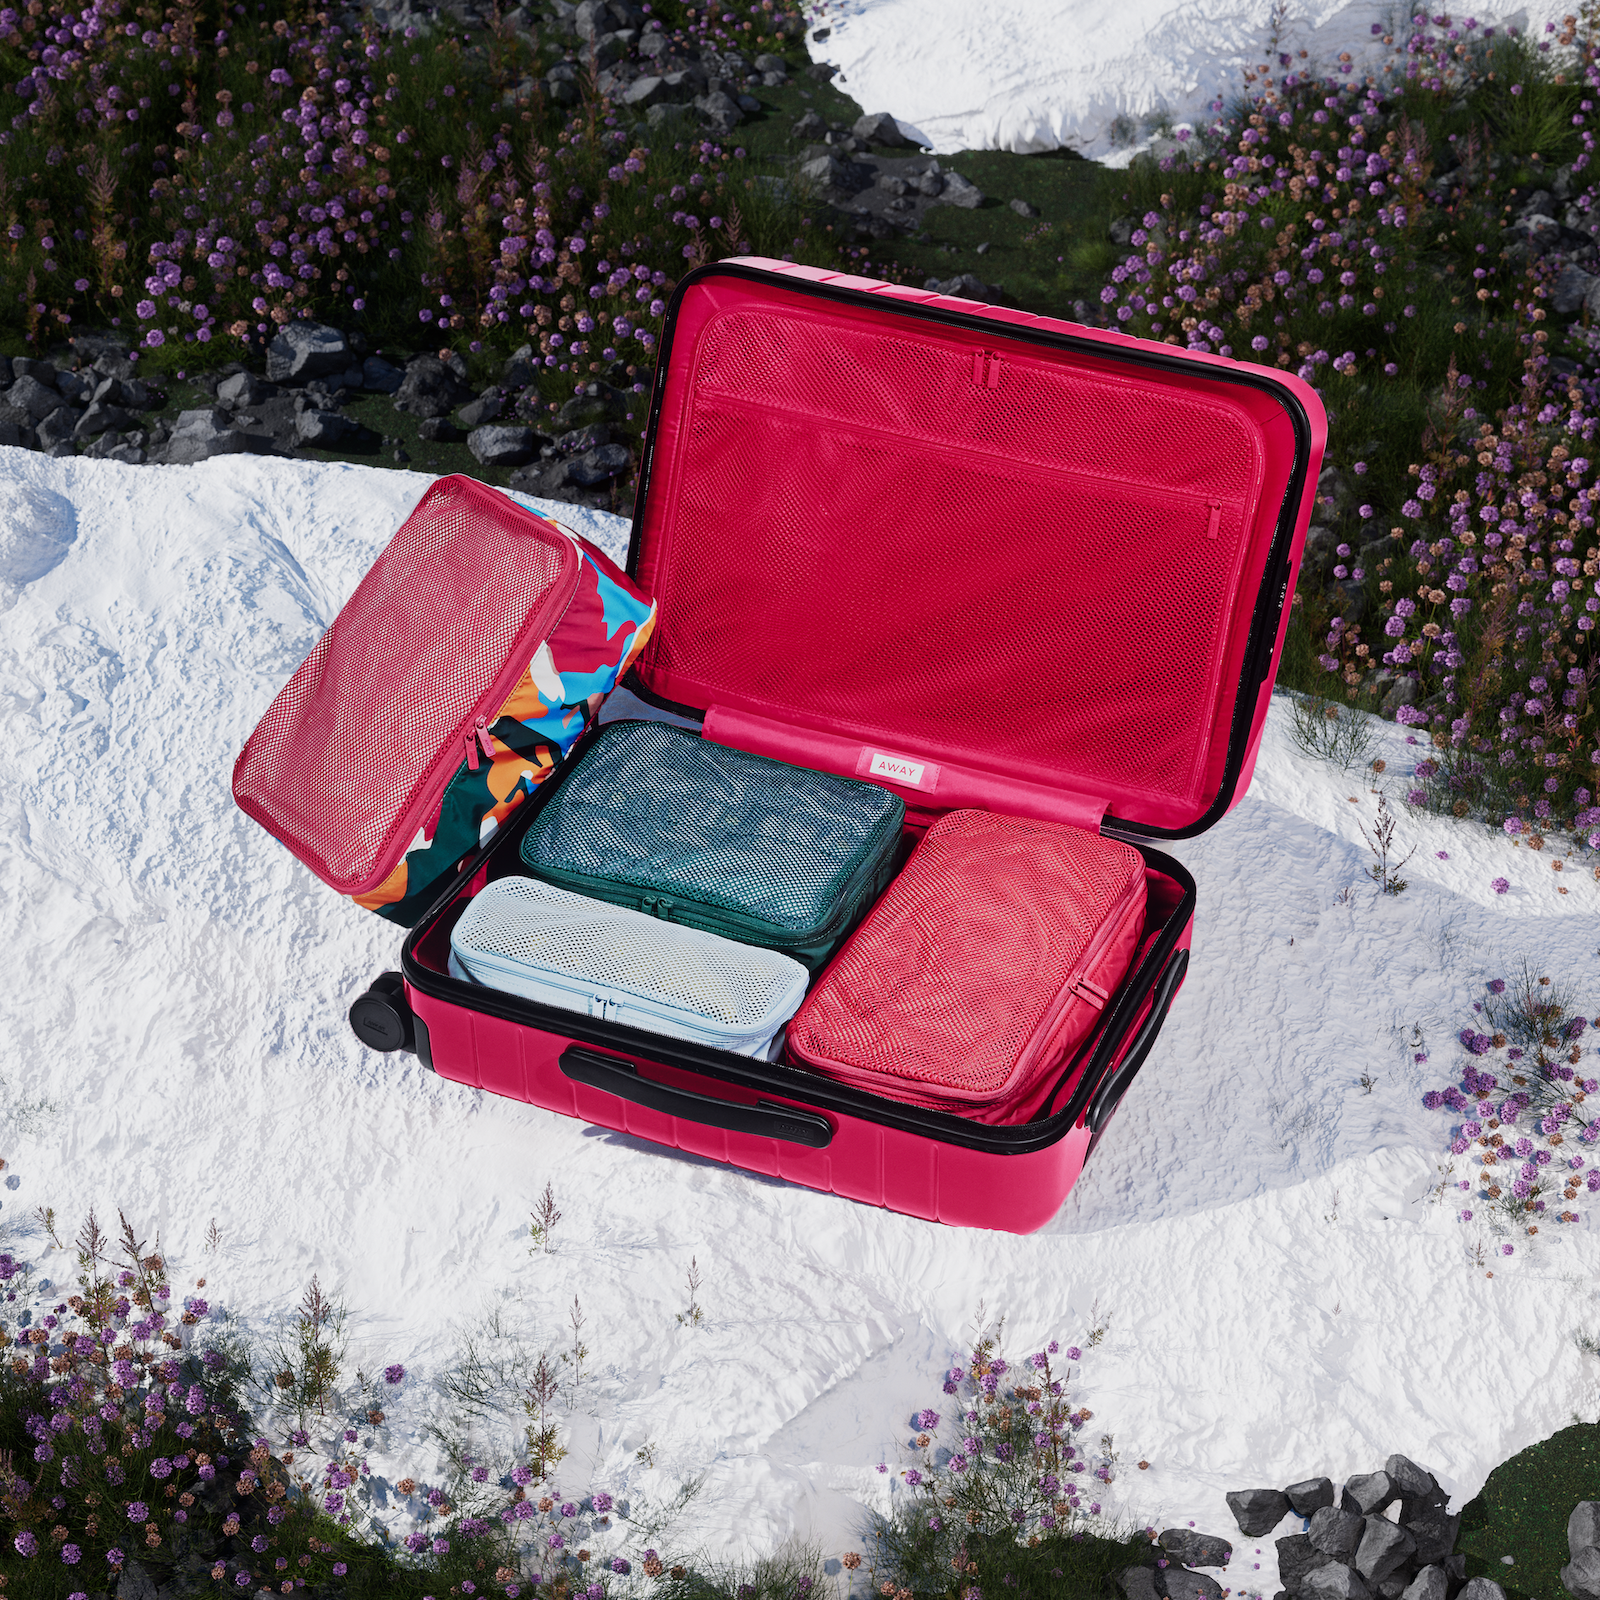 This Beach-Inspired Away Luggage Is the Only Carry-On We Want This Summer